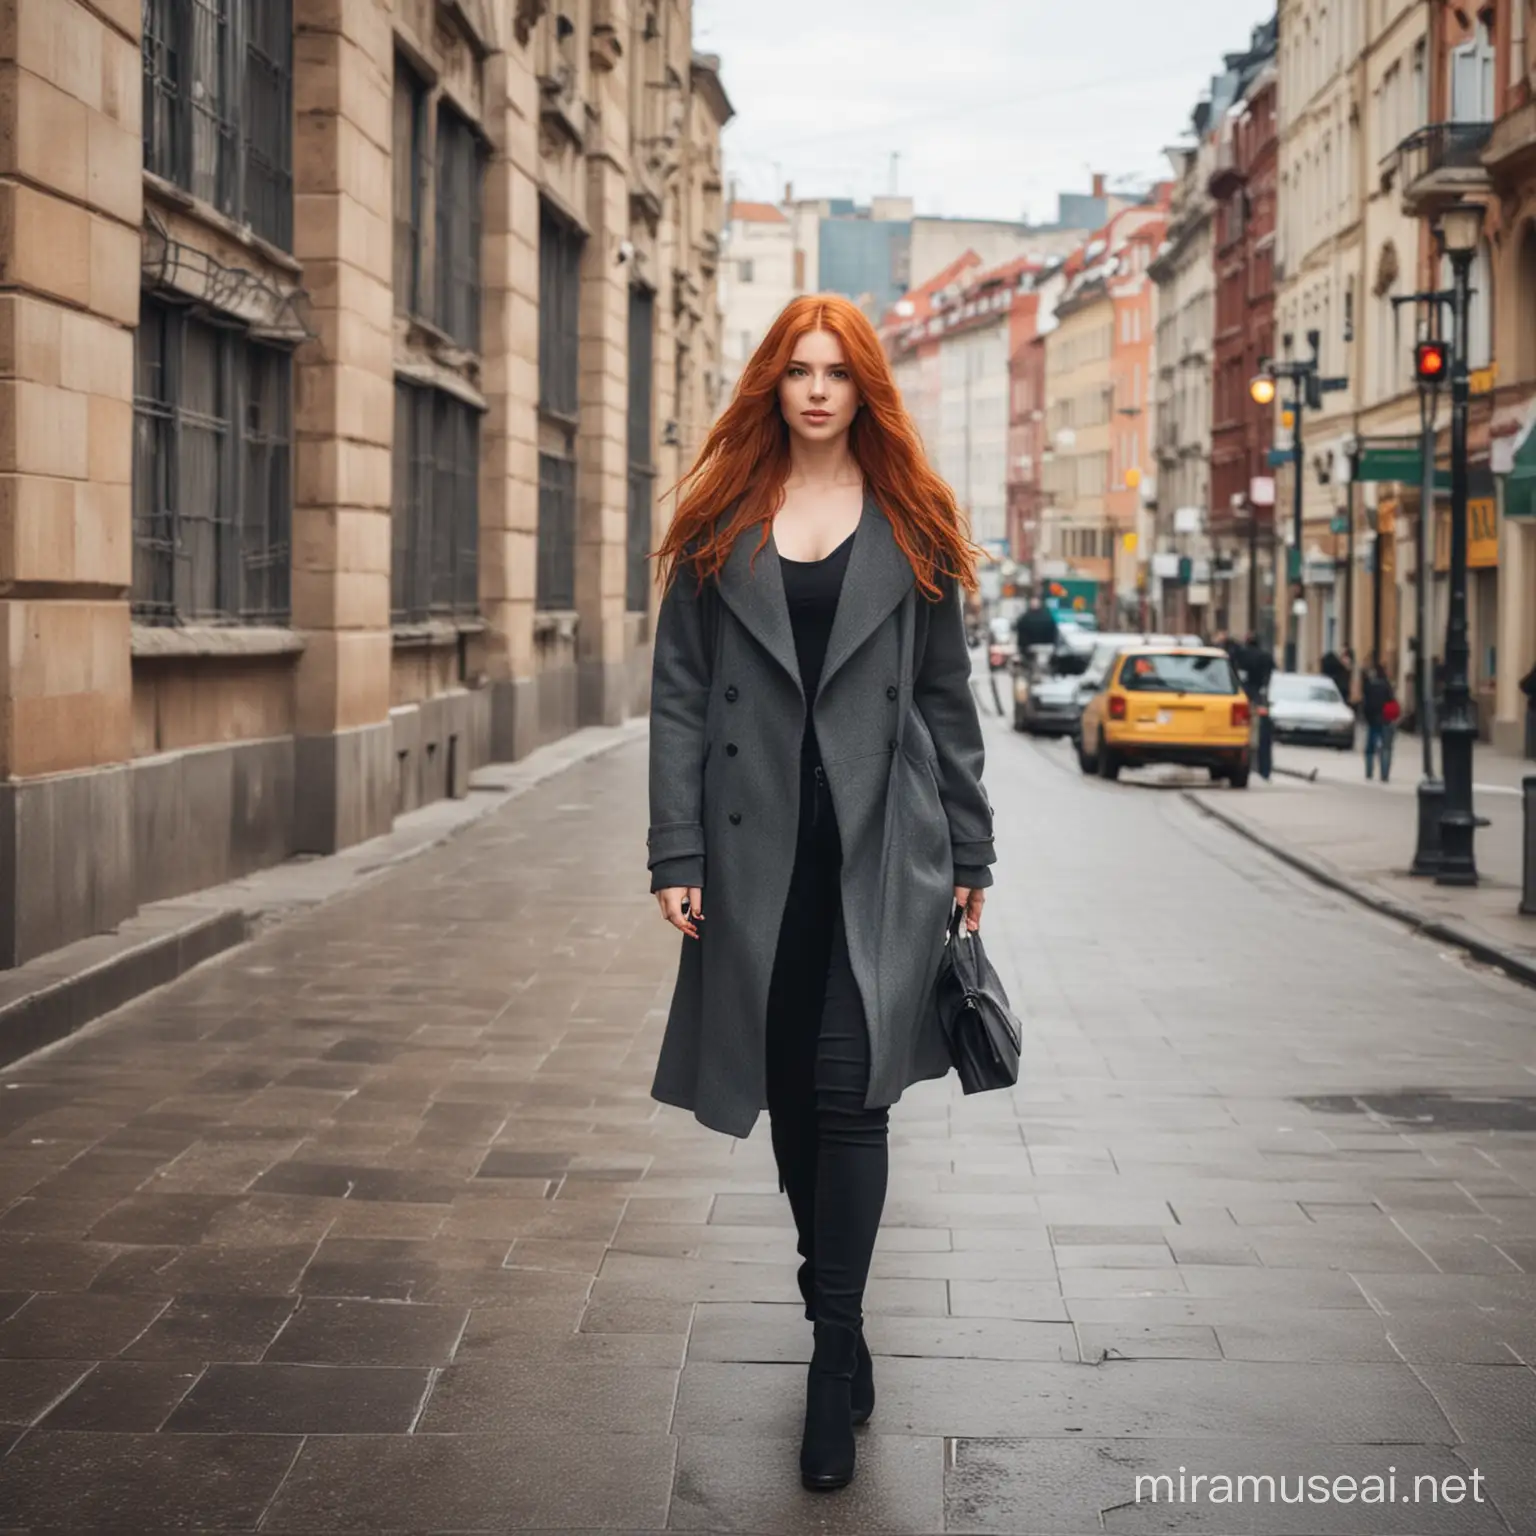 Urban Stroll RedHaired Girl Exploring the Cityscape